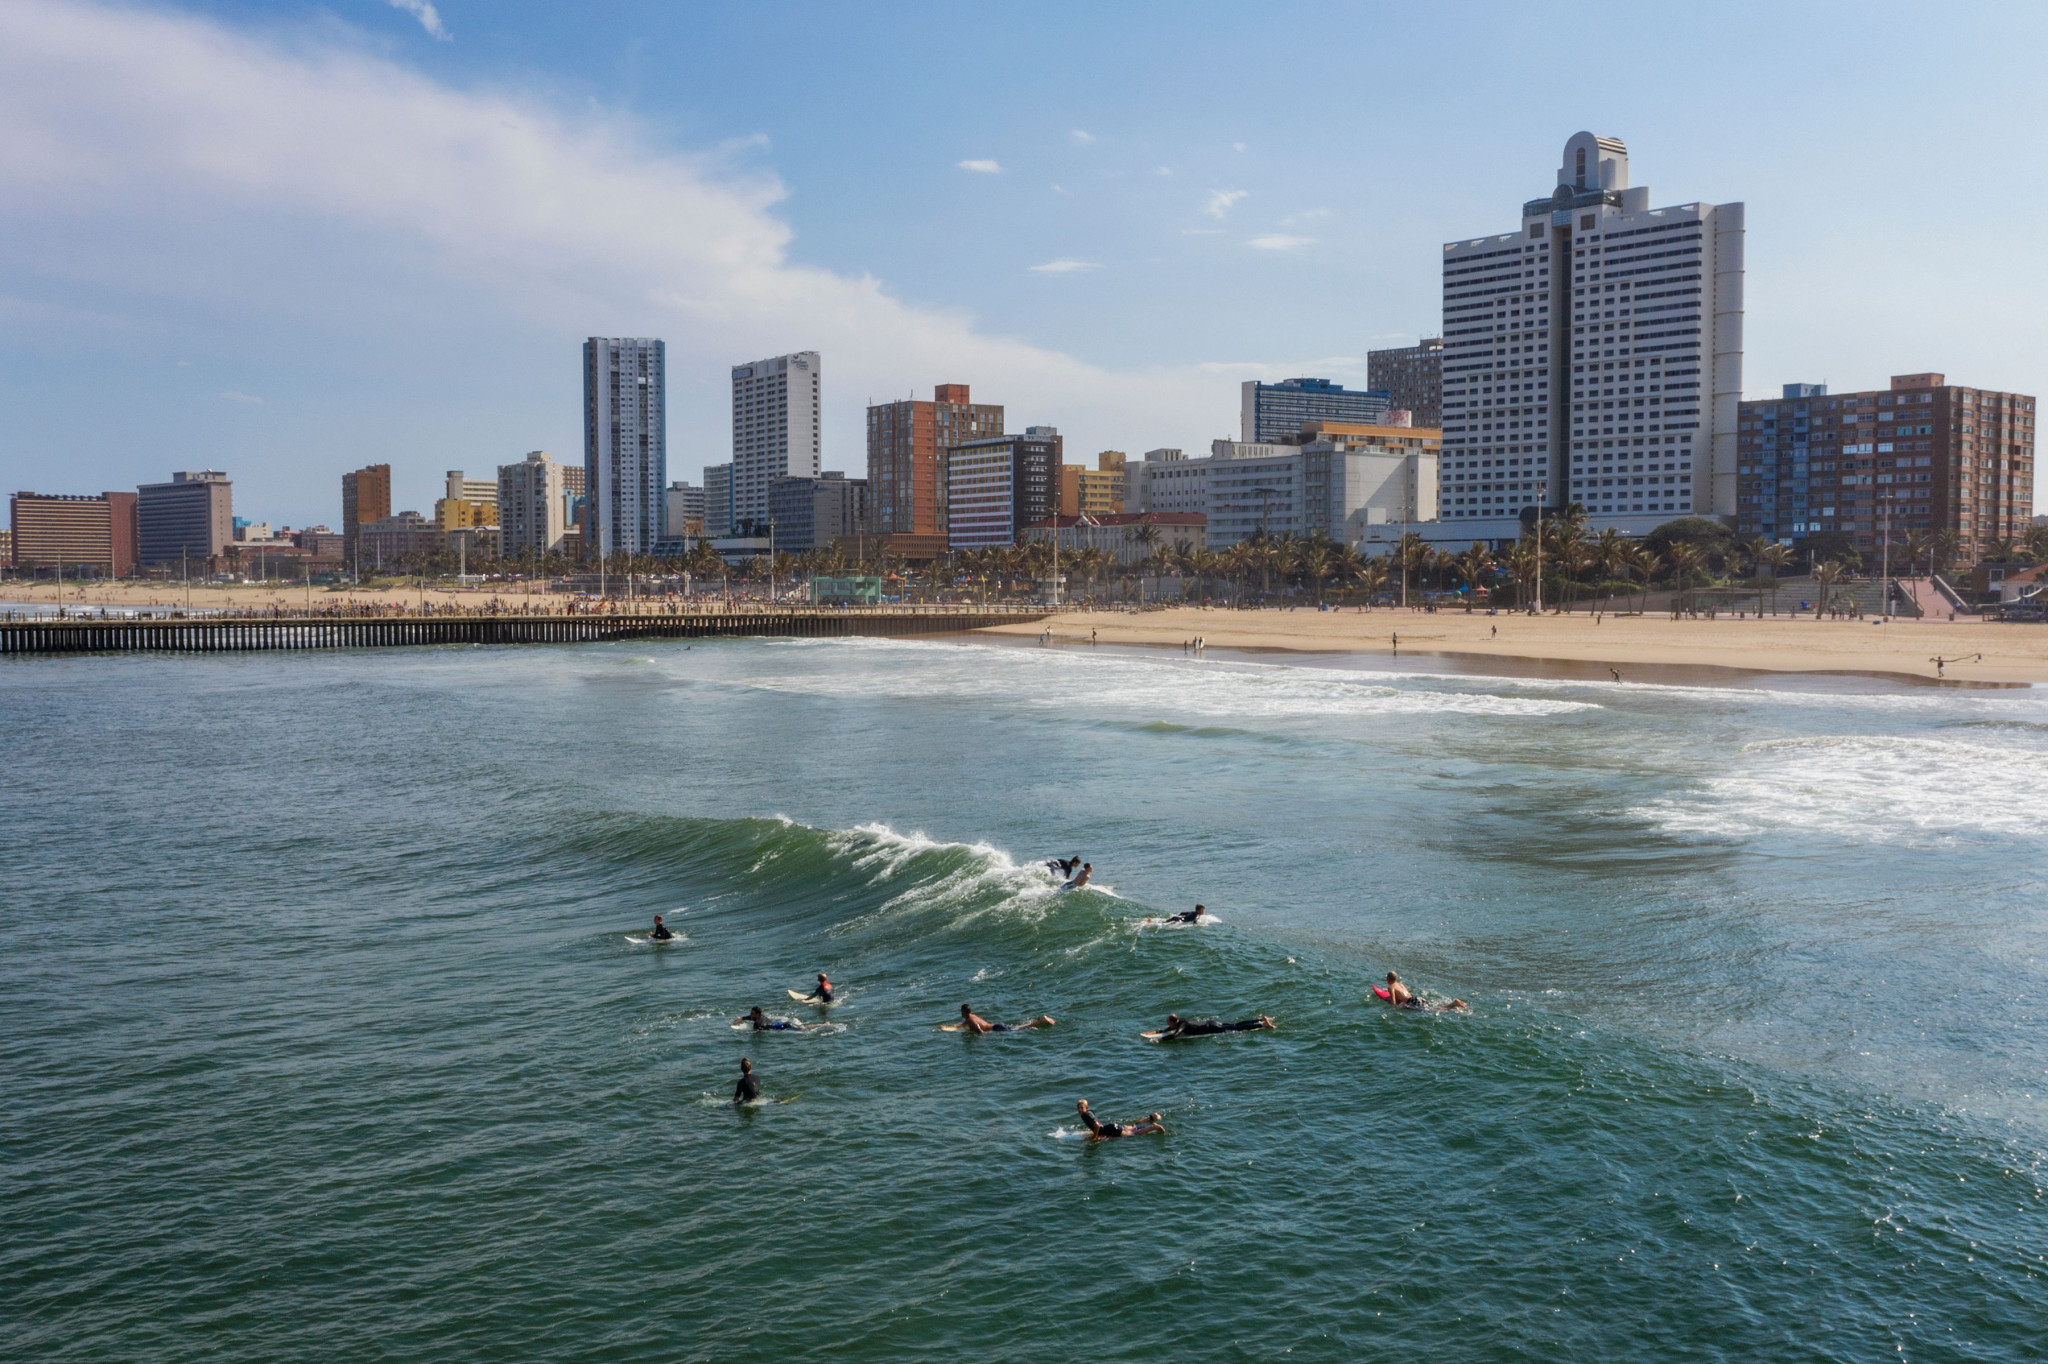 Durban is due to host the first WTT Series event of 2023 in January, and the ITTF World Table Tennis Championship Finals in May ©Getty Images